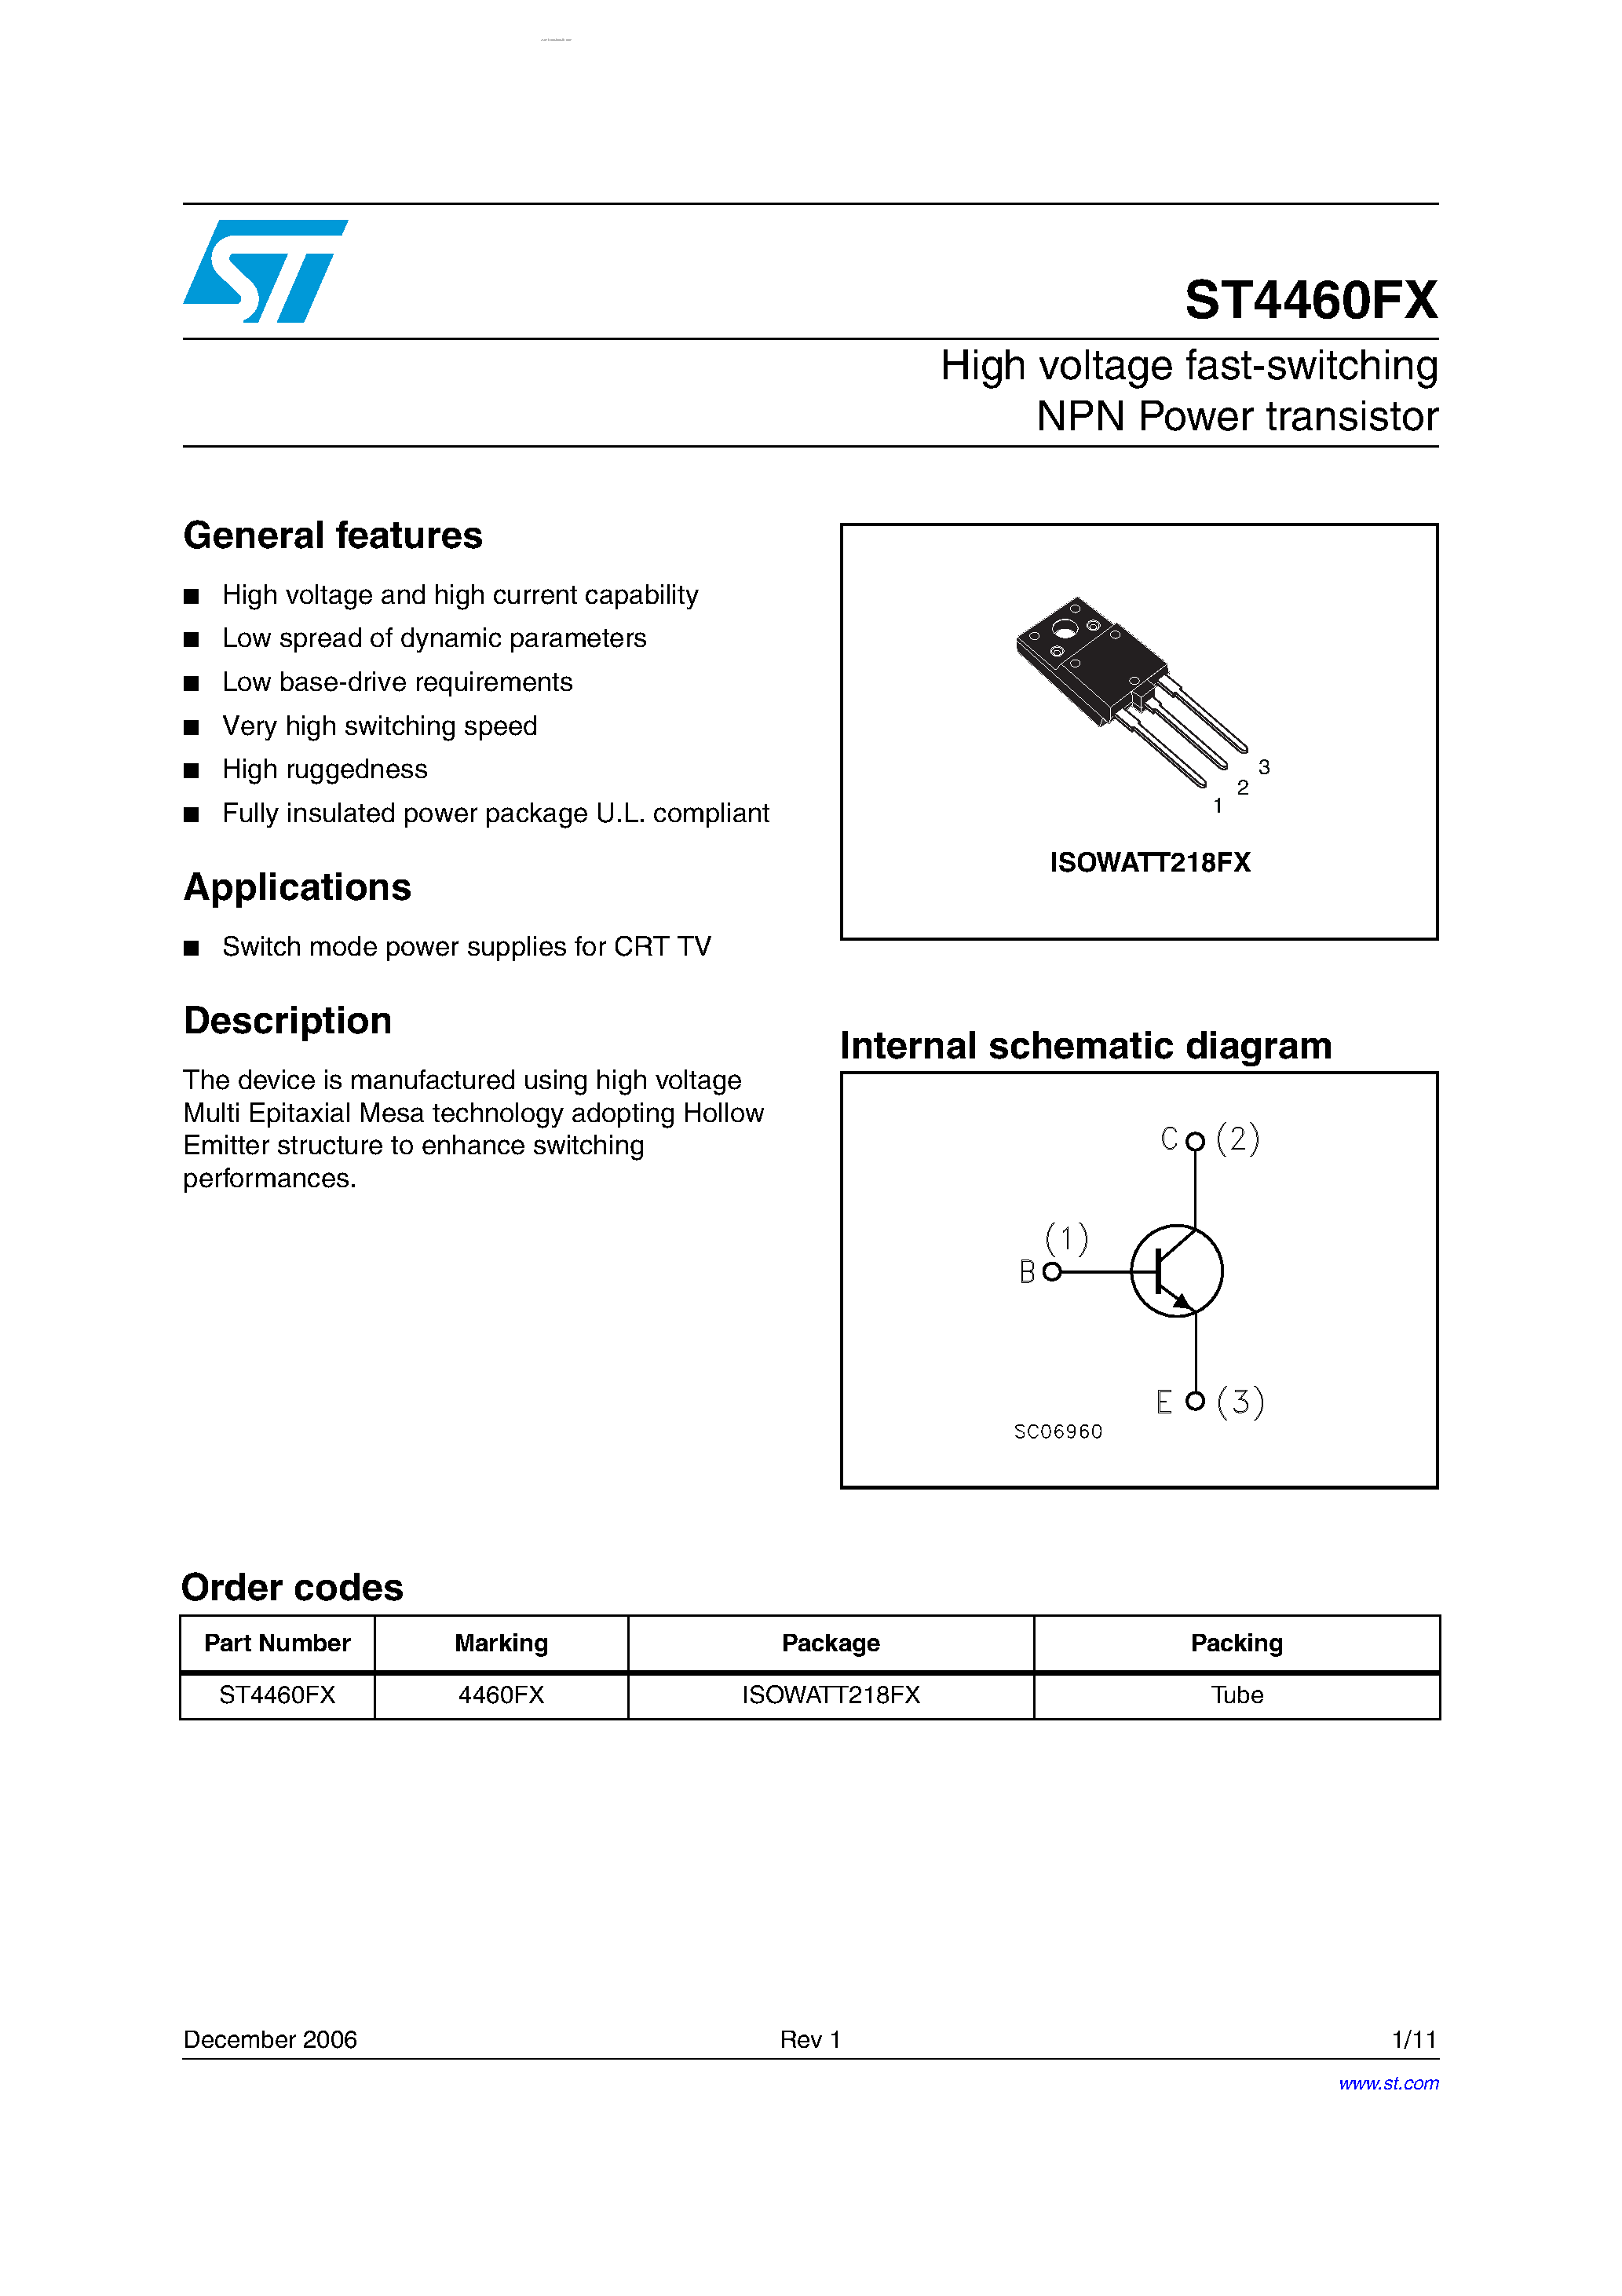 Datasheet ST4460FX - High voltage fast-switching NPN Power transistor page 1